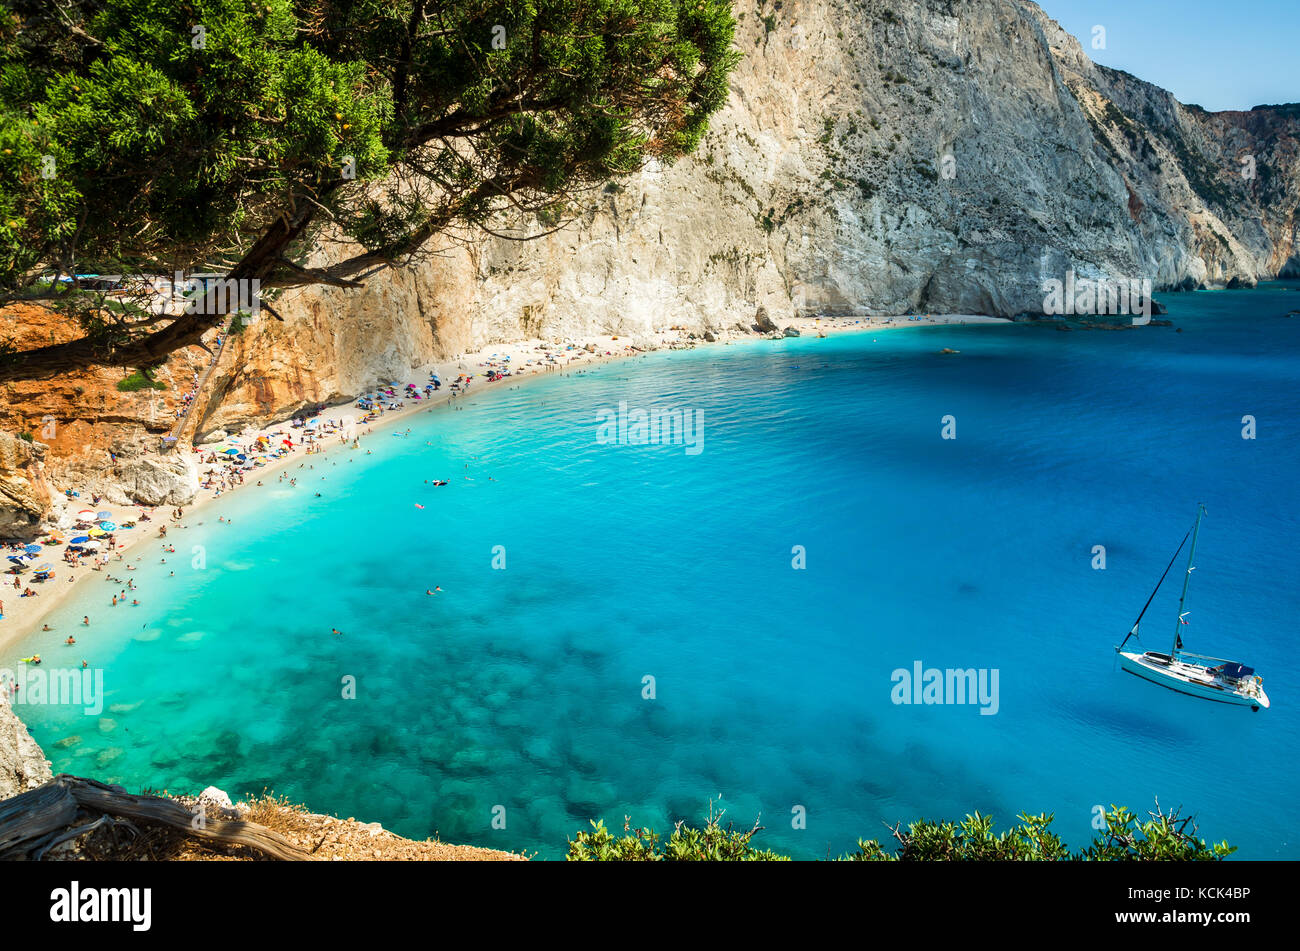 Porto Katsiki beach in Lefkada island, Greece. Beautiful view over the beach. The water is turquoise and there are tourists on the beach and a boat on Stock Photo